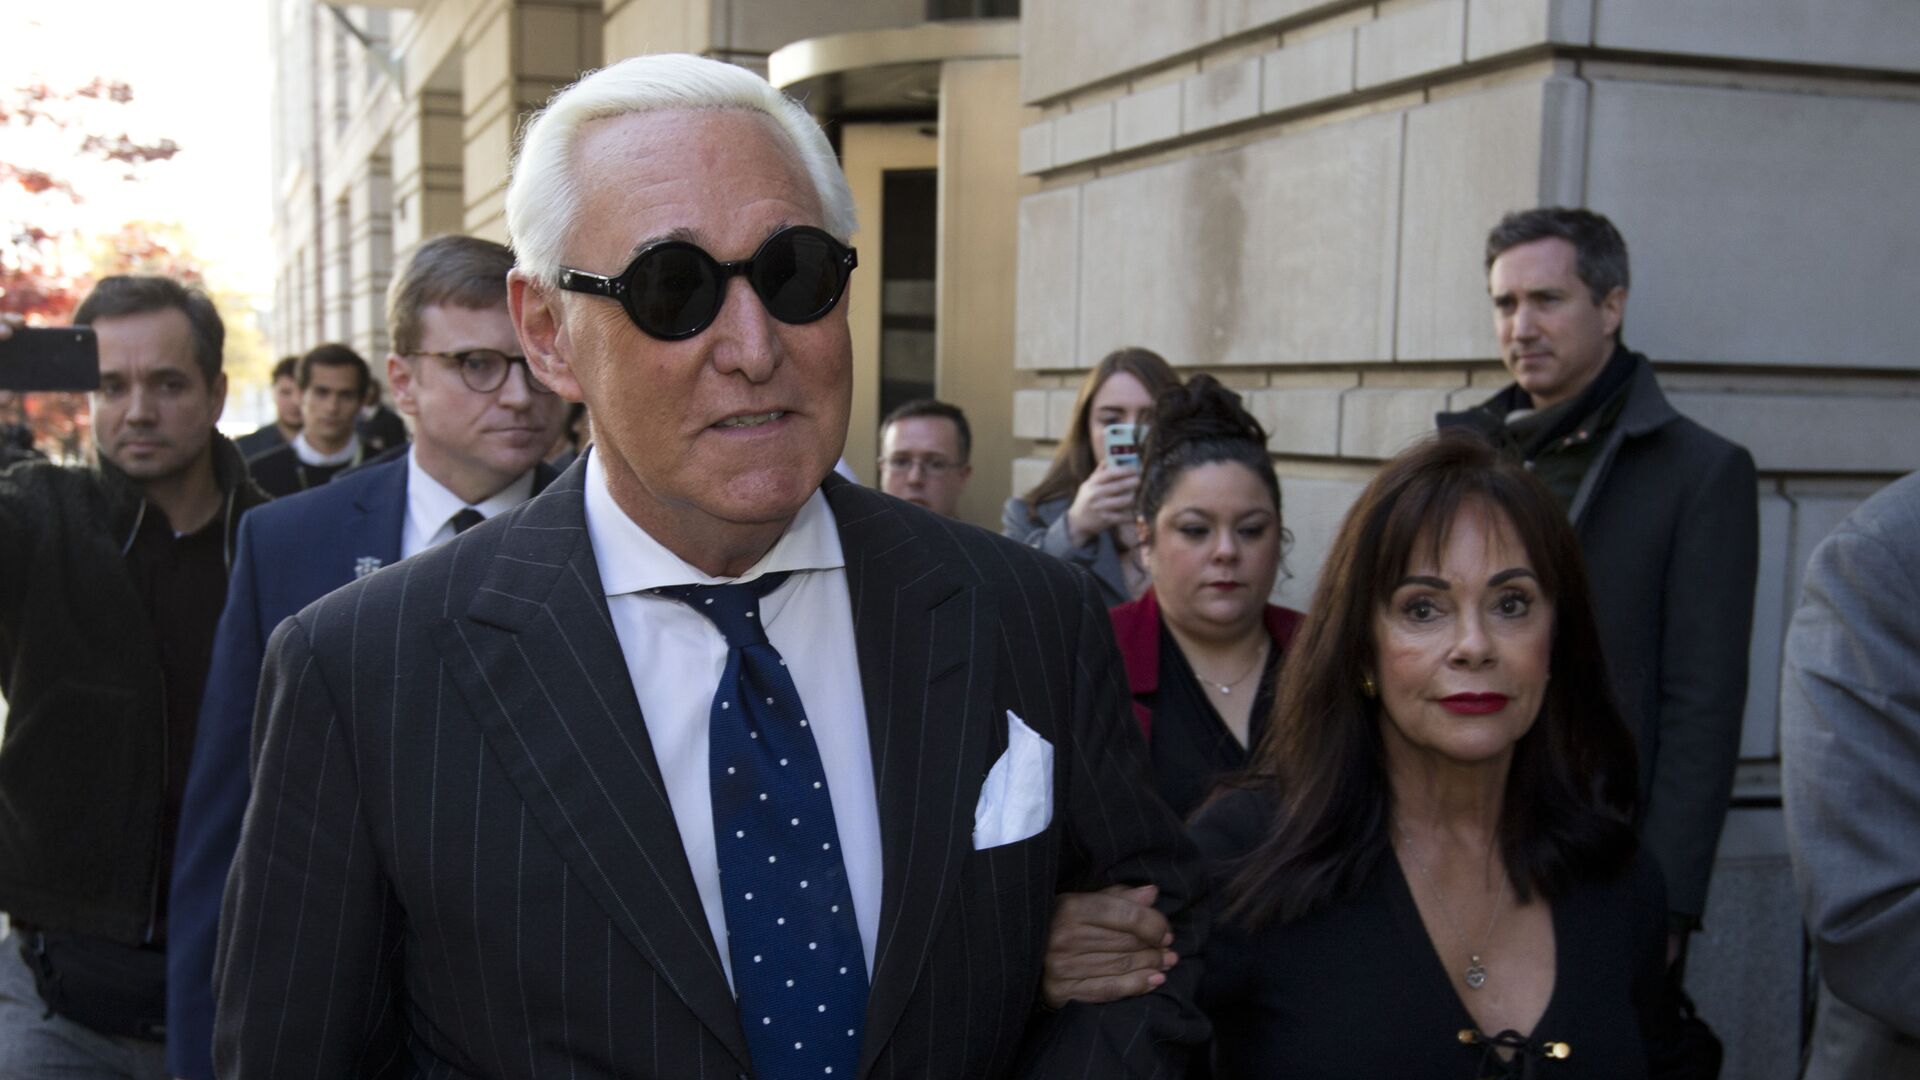 In this Nov. 15, 2019, file photo, Roger Stone, left, with his wife Nydia Stone, leaves federal court in Washington, Friday, Nov. 15, 2019 - Sputnik International, 1920, 21.02.2021